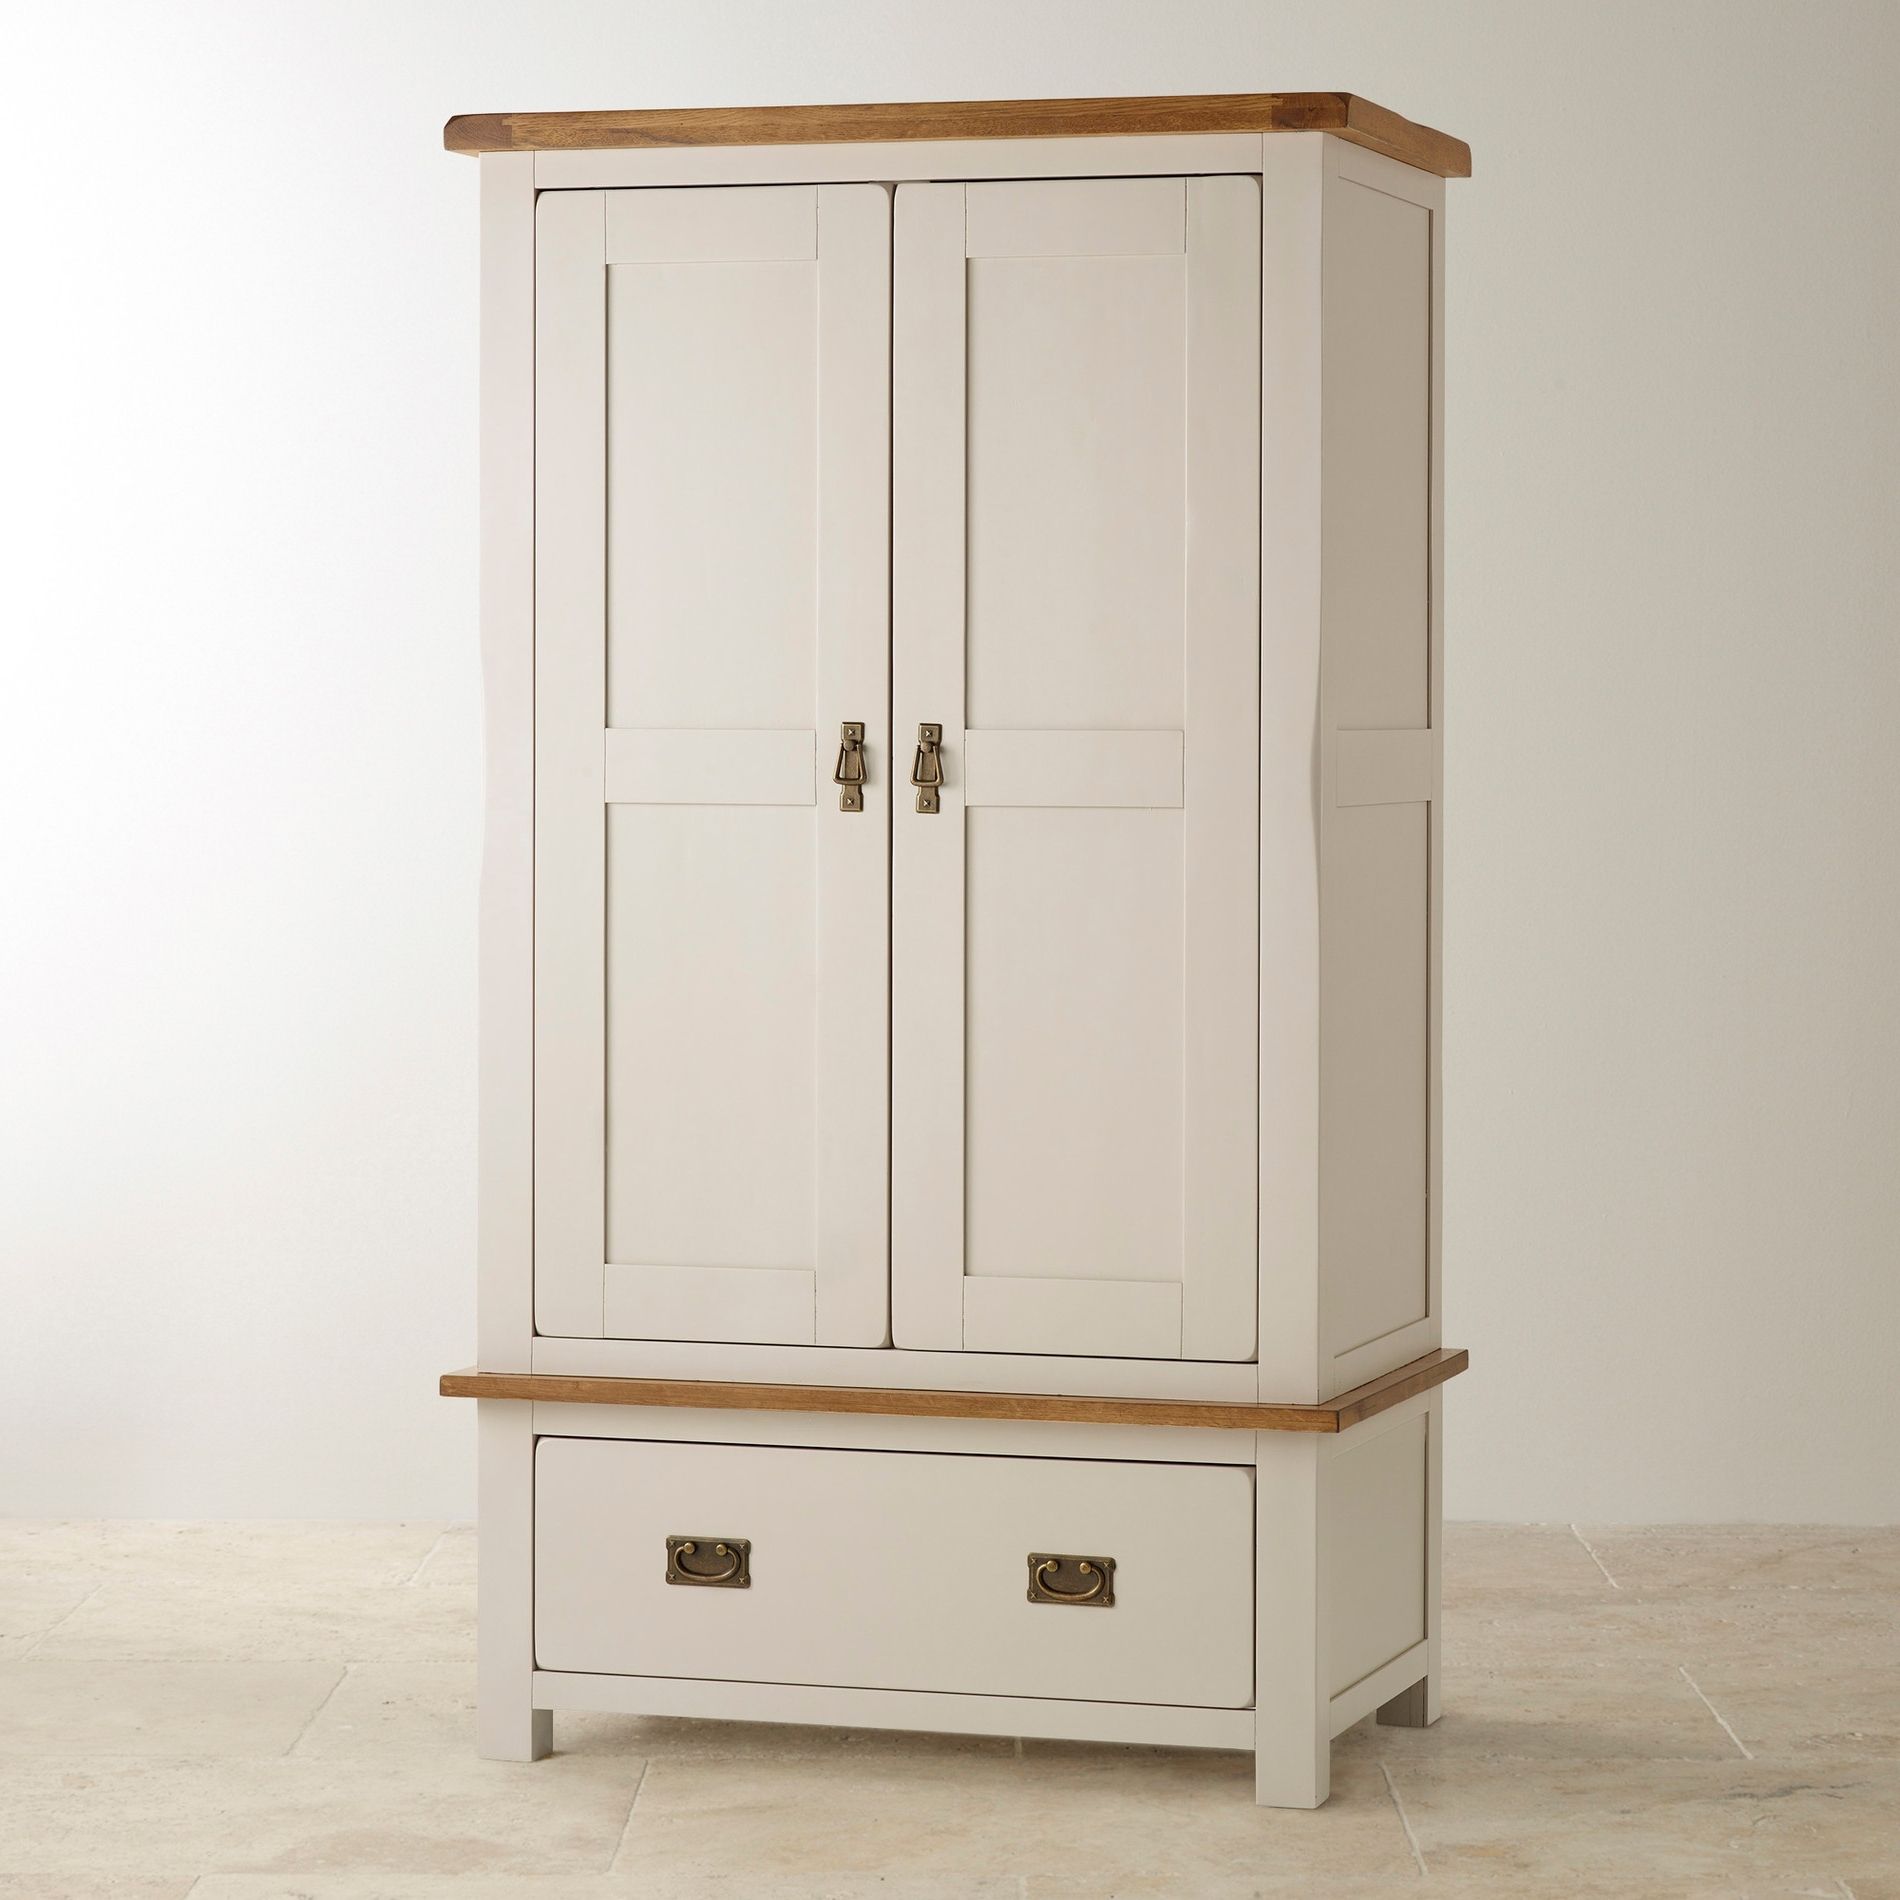 Solid Wood Wardrobe Fitted Wardrobes White With Drawers Doors You Inside Well Known White Wood Wardrobes With Drawers (View 6 of 15)